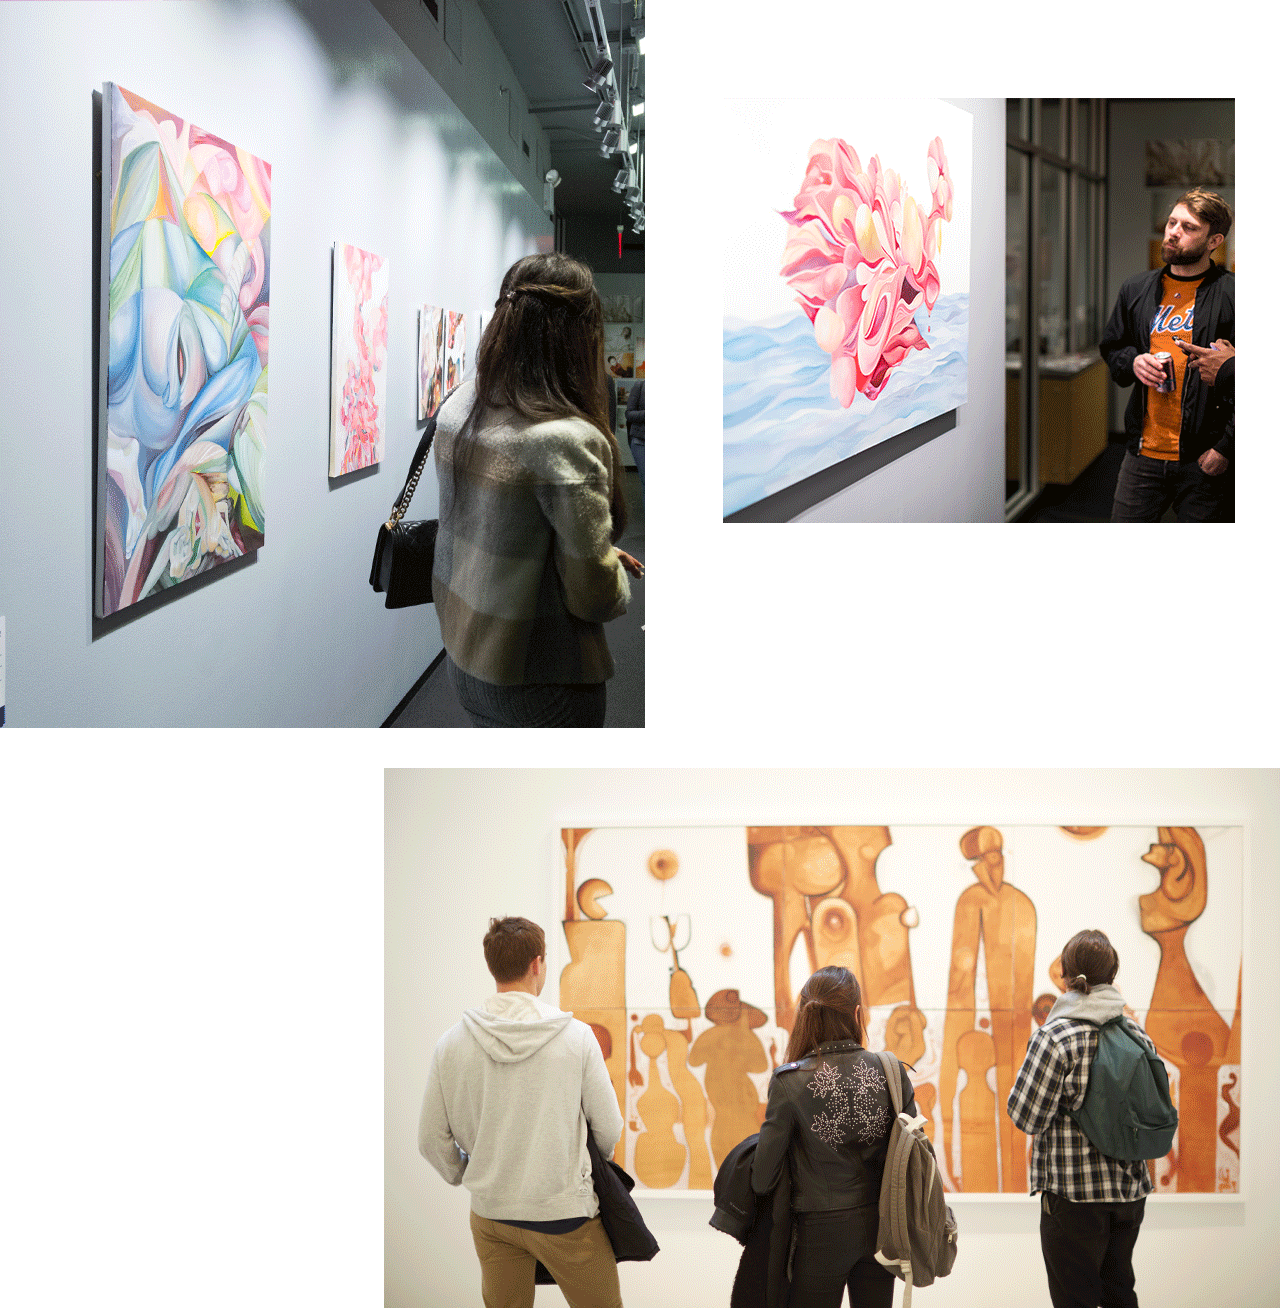 A collage of images from NYU gallery spaces in New York (clockwise): 1) Student work being presented on a wall, a student stands nearby with their back turned to the camera. 2) A student looking at work hanging on a wall. 3) Three students observing art work with their backs turned from the camera.